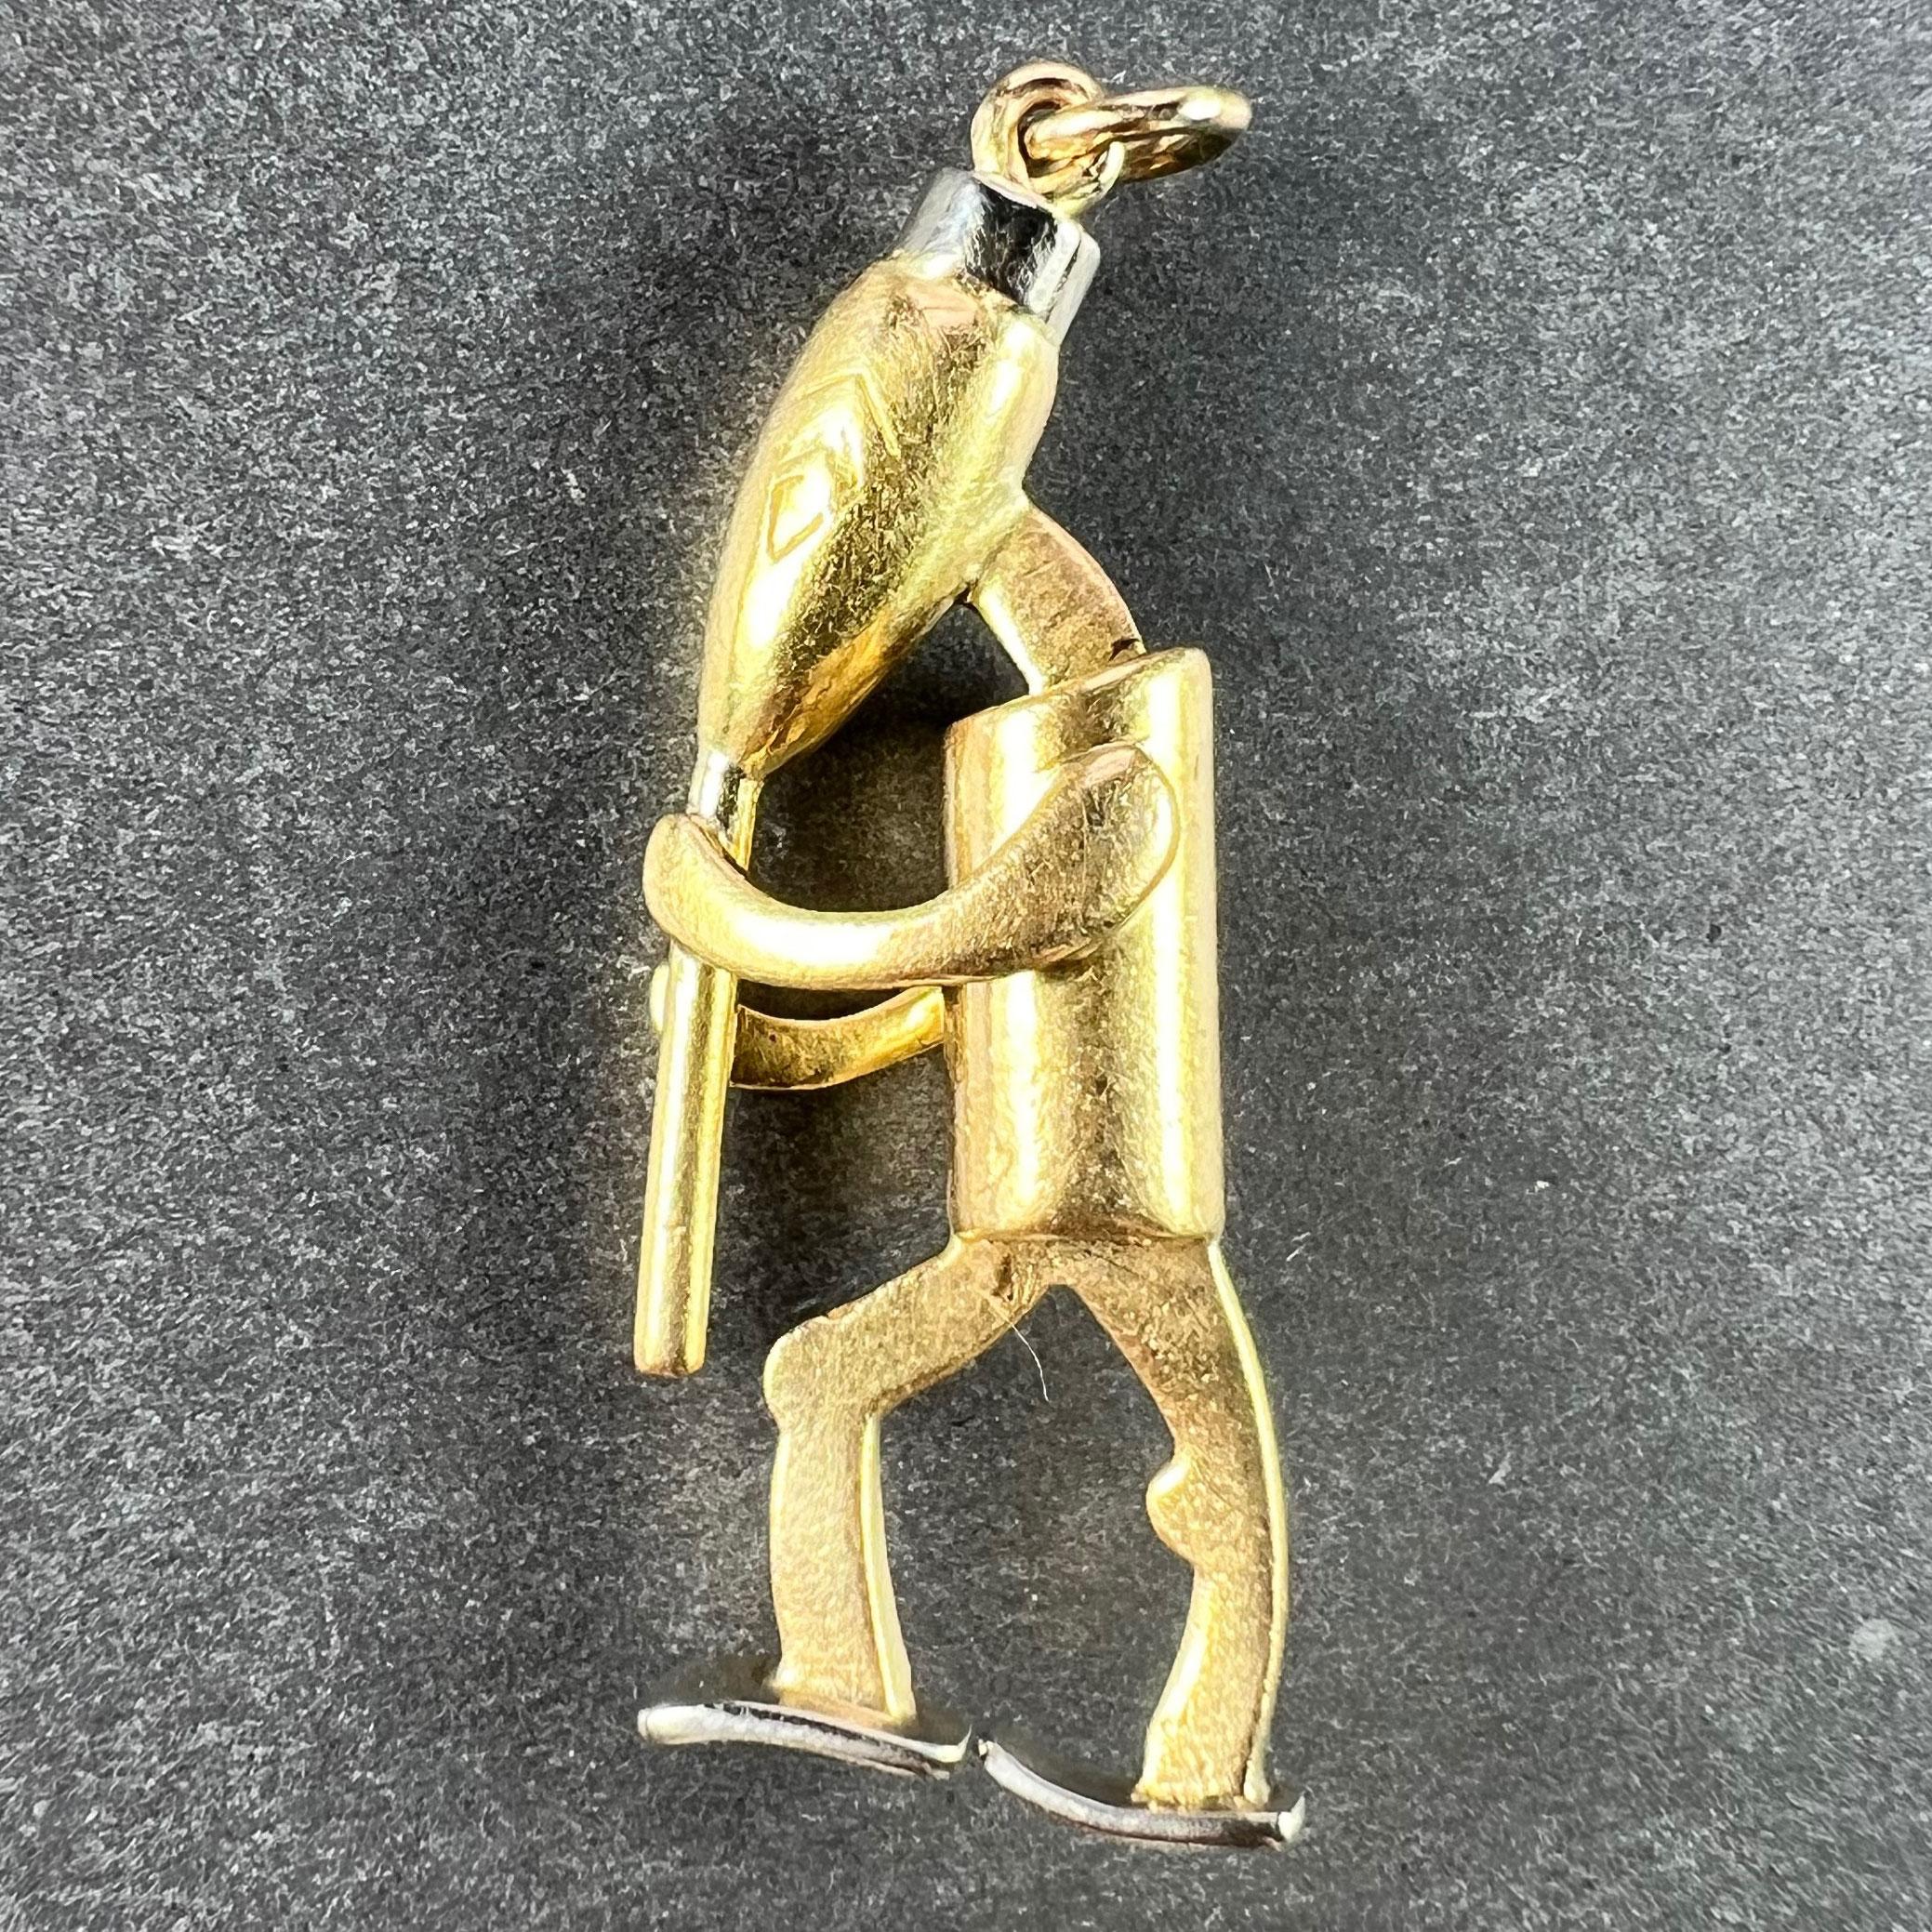 An 18 karat (18K) yellow and white gold charm pendant designed as a cartoon character of a piper or musician playing the pipe, clarinet, recorder or similar musical instrument. Unmarked but tested for 18 karat gold. 

Dimensions: 3.2 x 2.2 x 0.8 cm